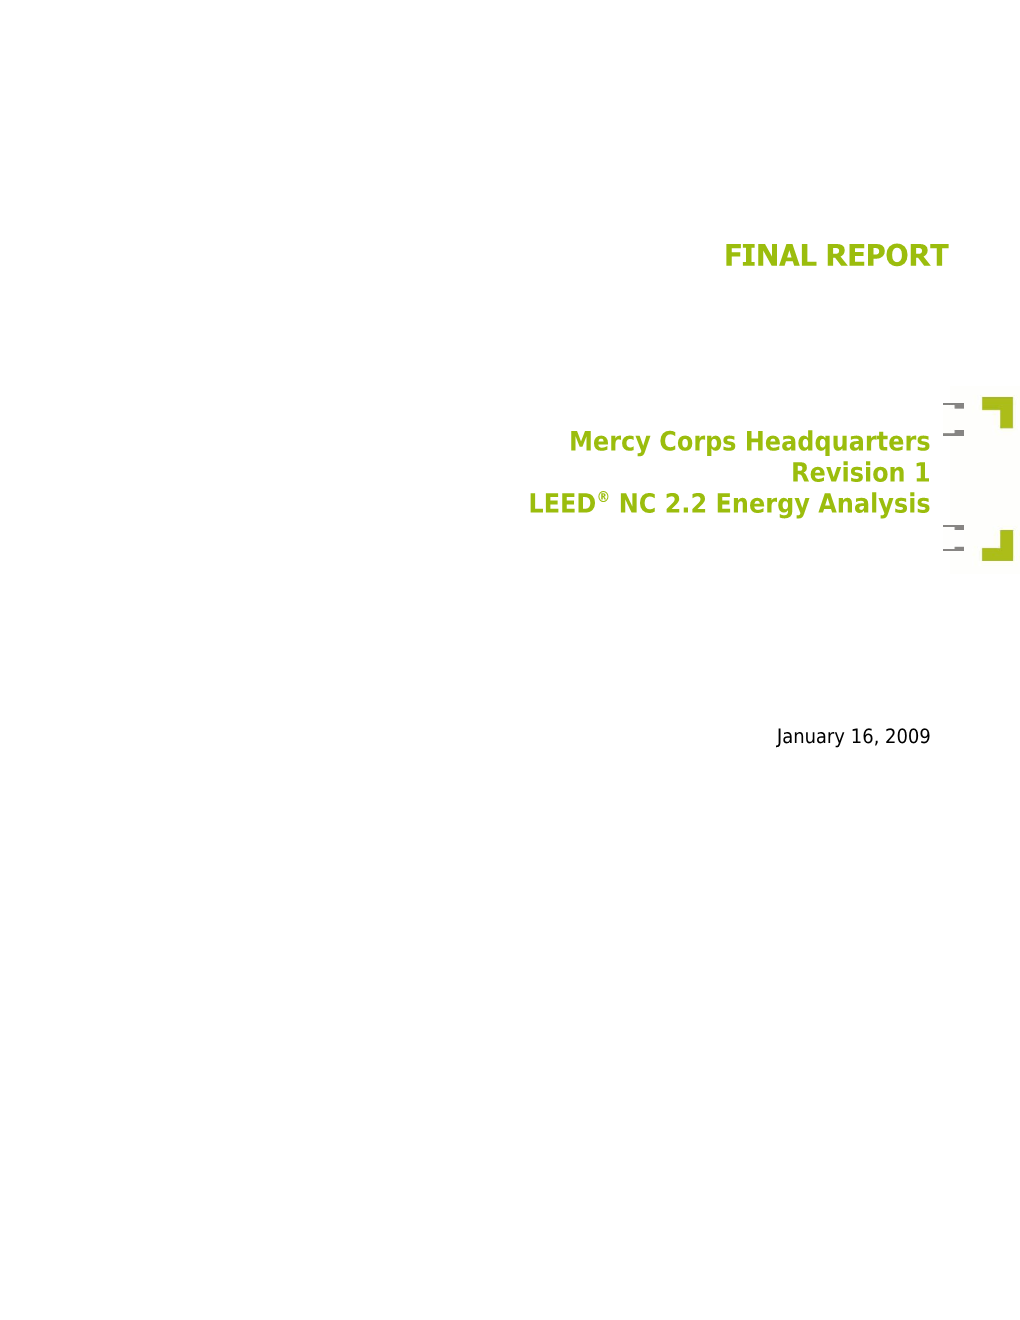 January 16, 2009Mercy Corps Headquarters Eac1 Energy Analysis for LEED Page 1